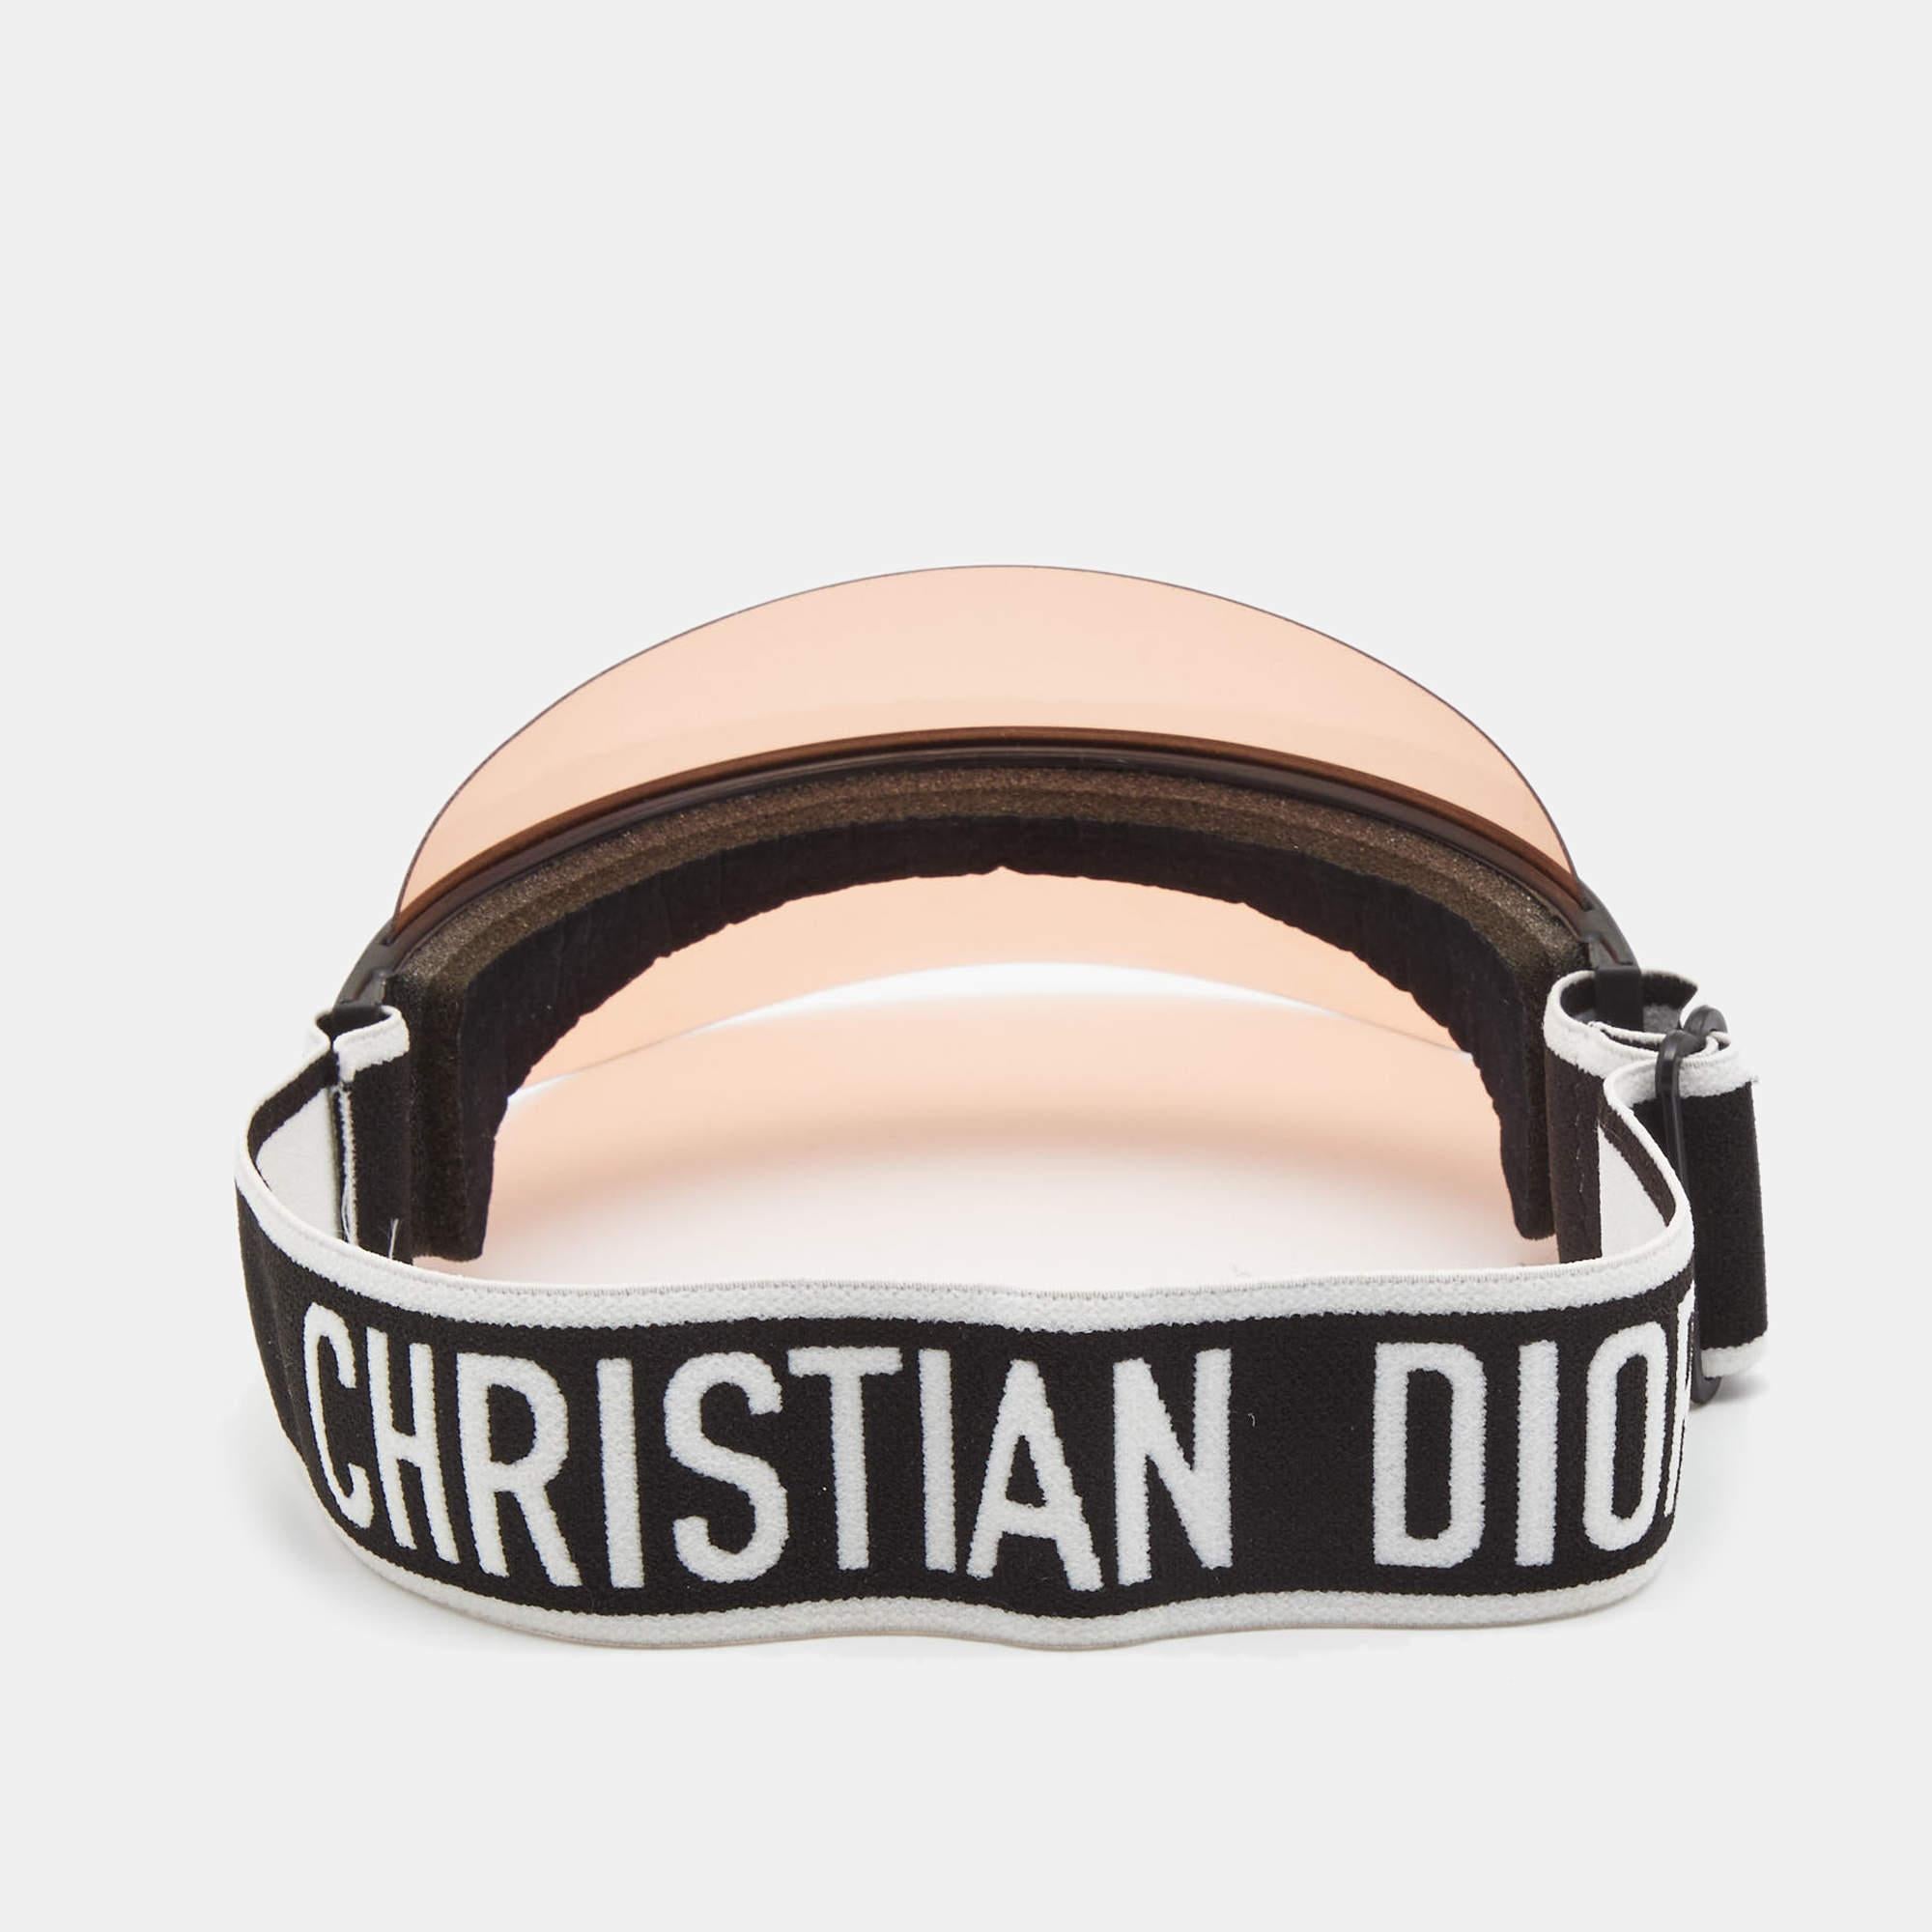 Elevate your summer vacay edit with this Dior Club1 sun visor! It has a pink visor and the brand signature on the front and back. It is perfect for your sunny days out.

